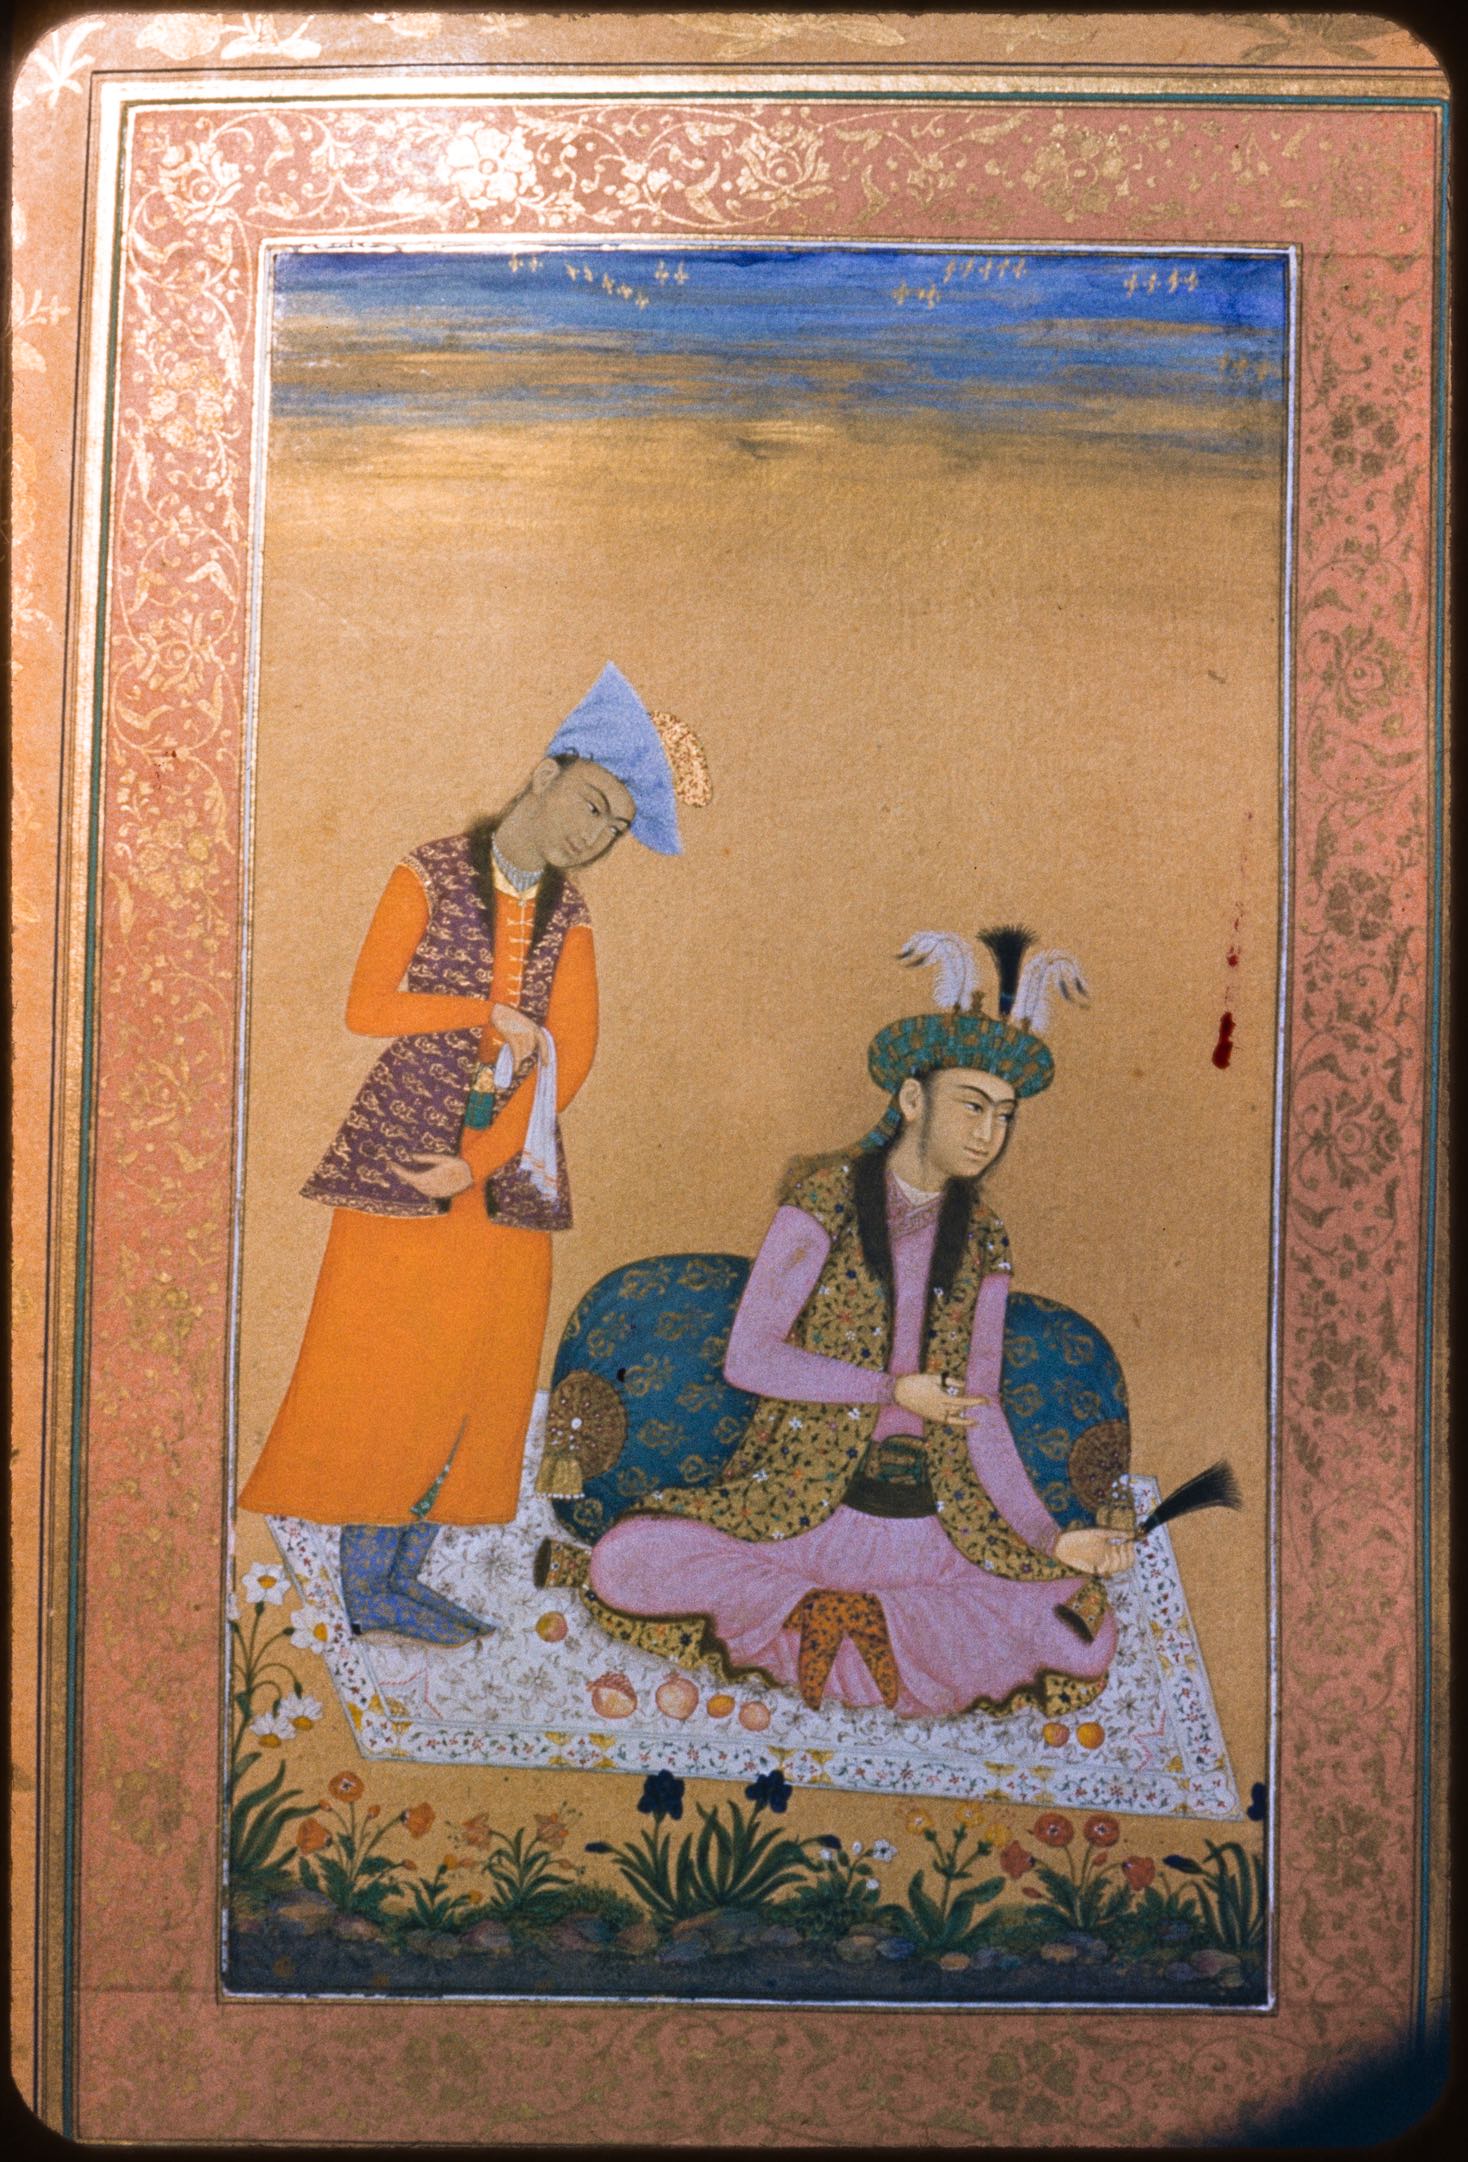 Prince and attendant seated on a white carpet, f. 22 from the Dara Shikoh Album (British Library Add. Or. 3129)